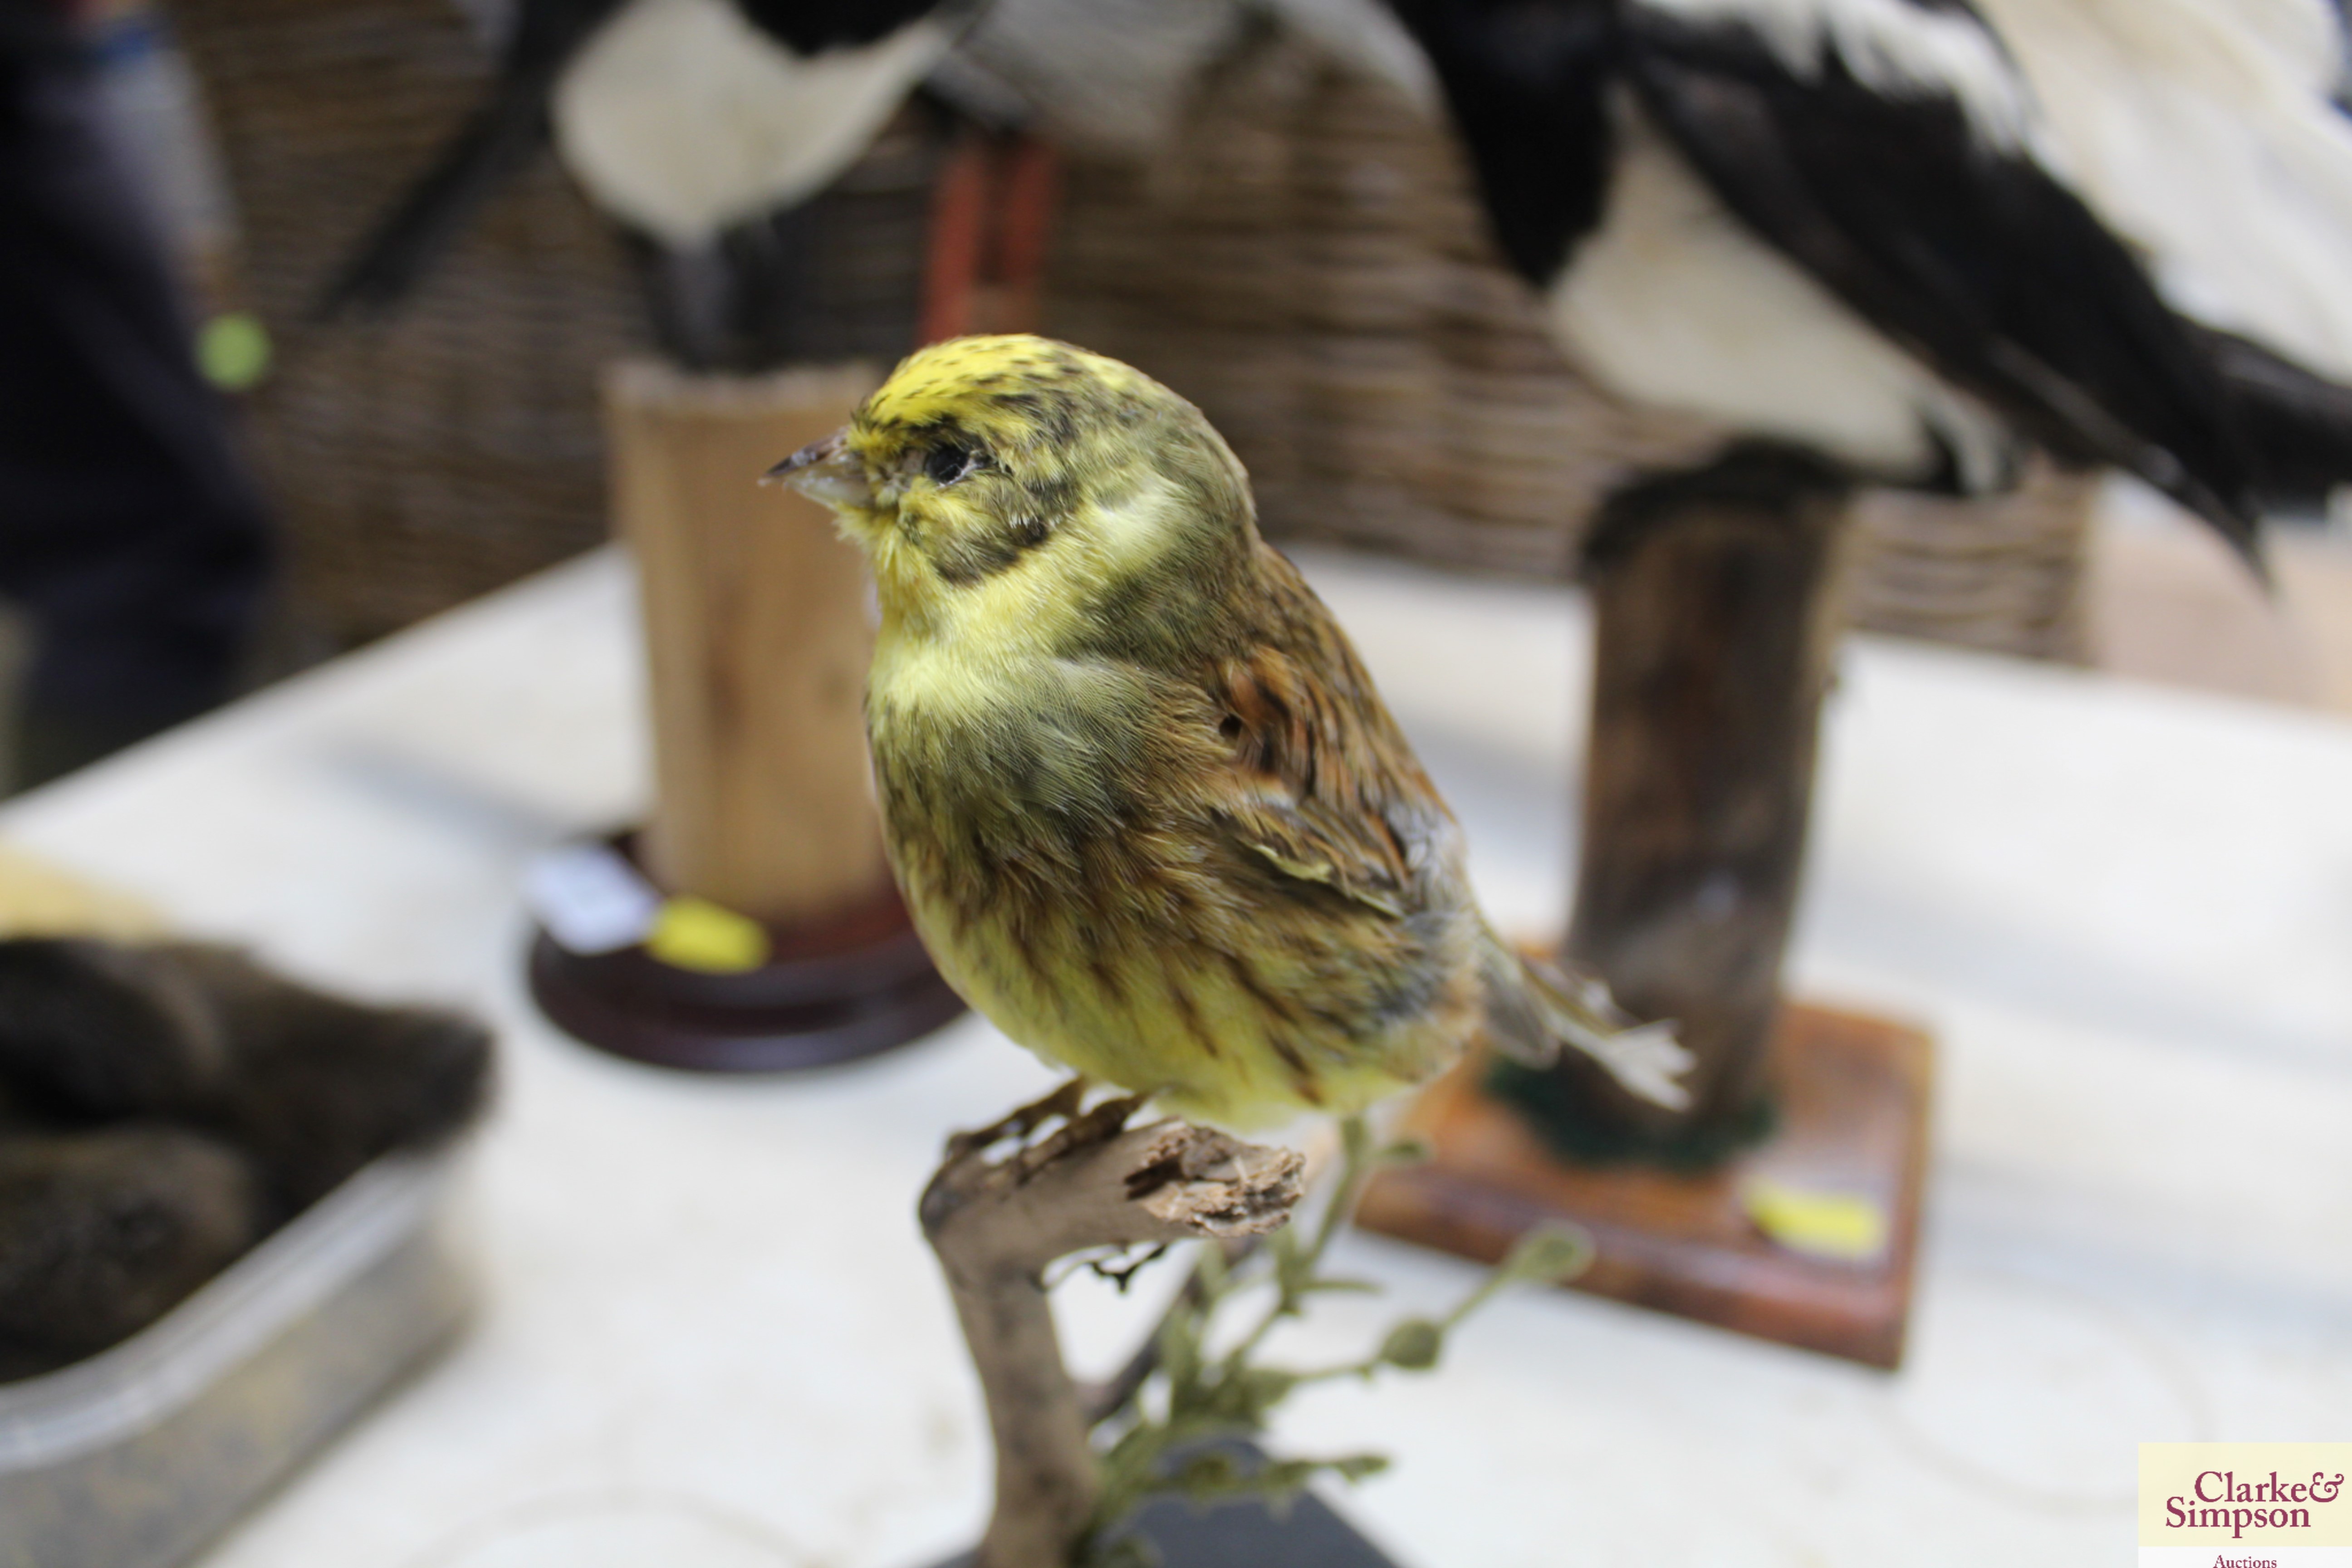 A preserved and mounted yellowhammer bird - Image 2 of 3